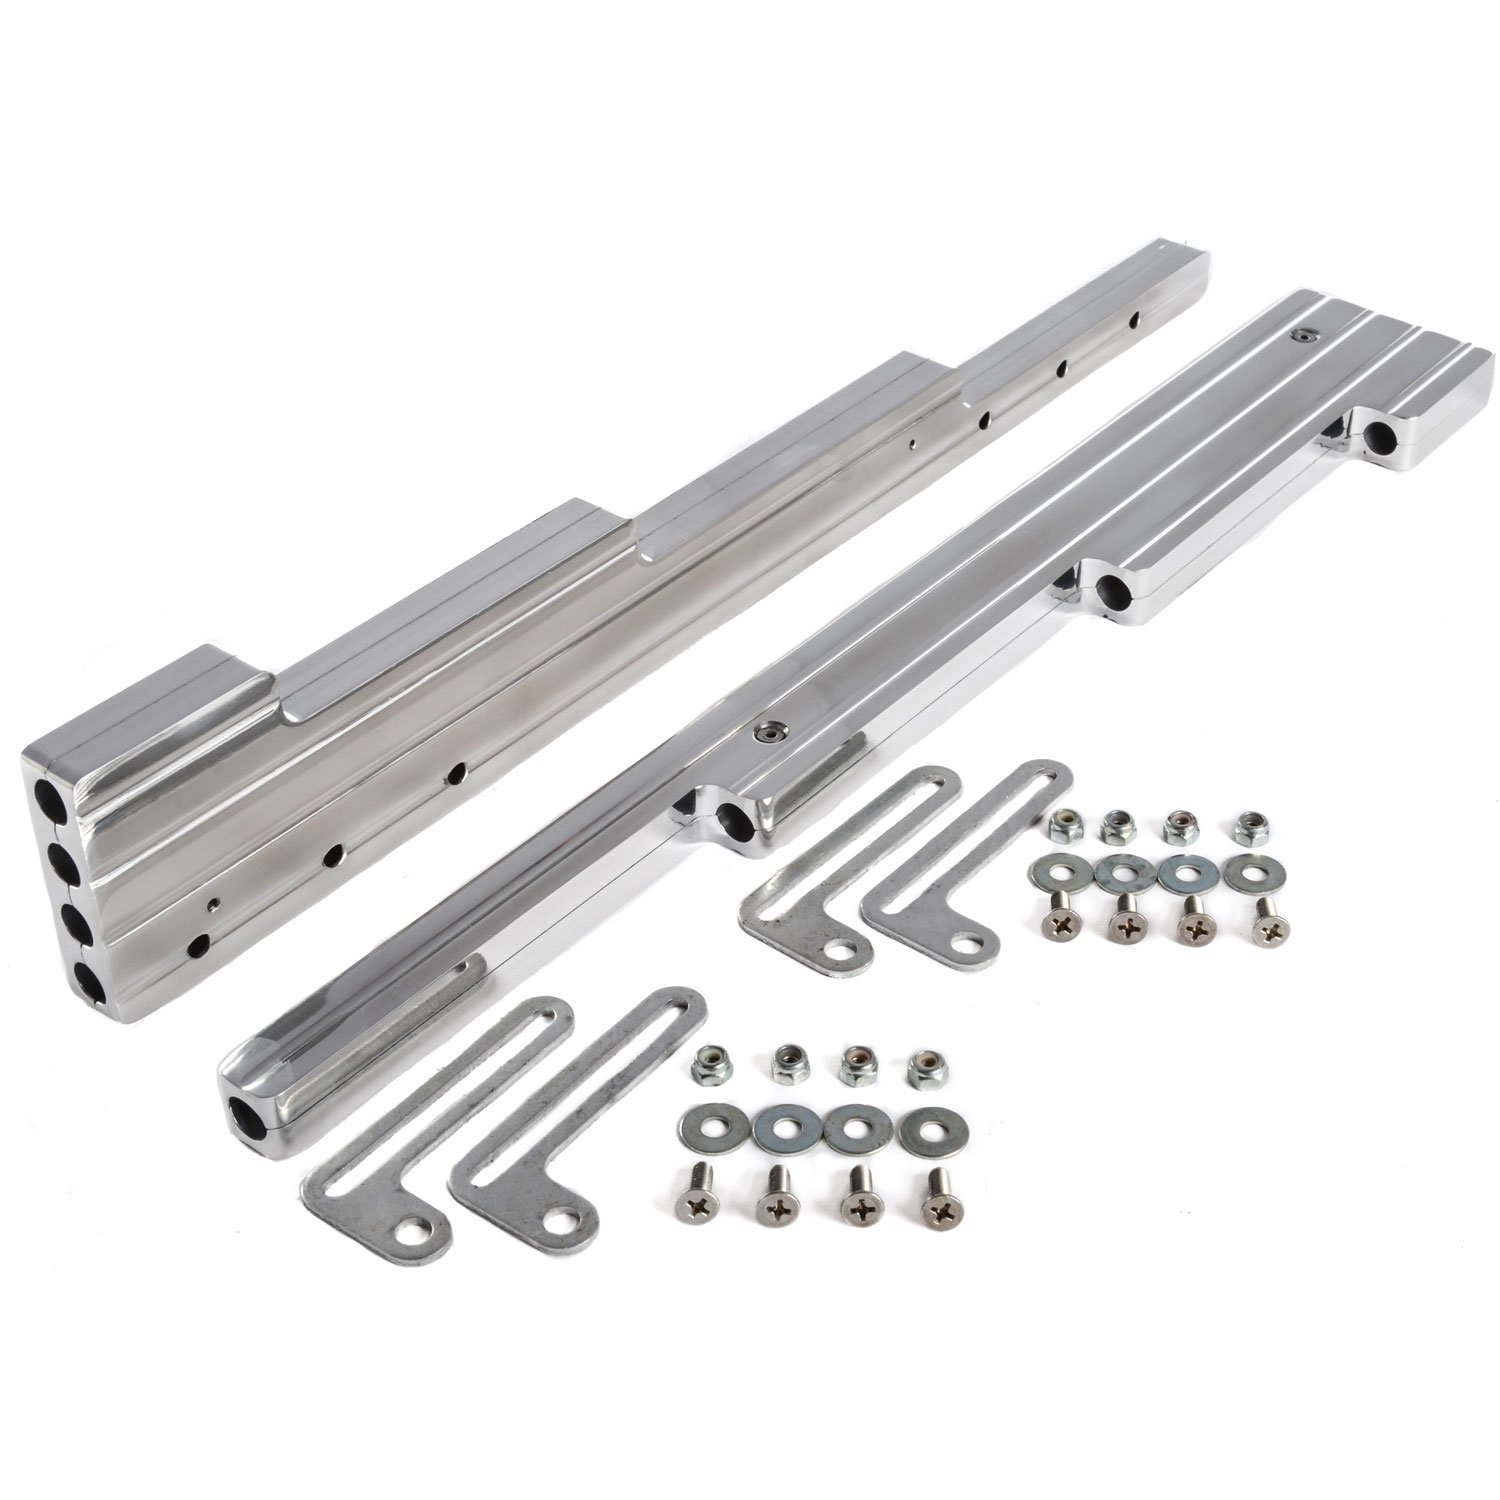 NEW BILLET SPECIALTIES SMALL BLOCK CHEVY SHORT POLISHED ALUMINUM VALVE COVER SET WITH BALL MILLED COVERS WITH BALL MILLED PCV BREATHER, OIL FILL CAP, - 2